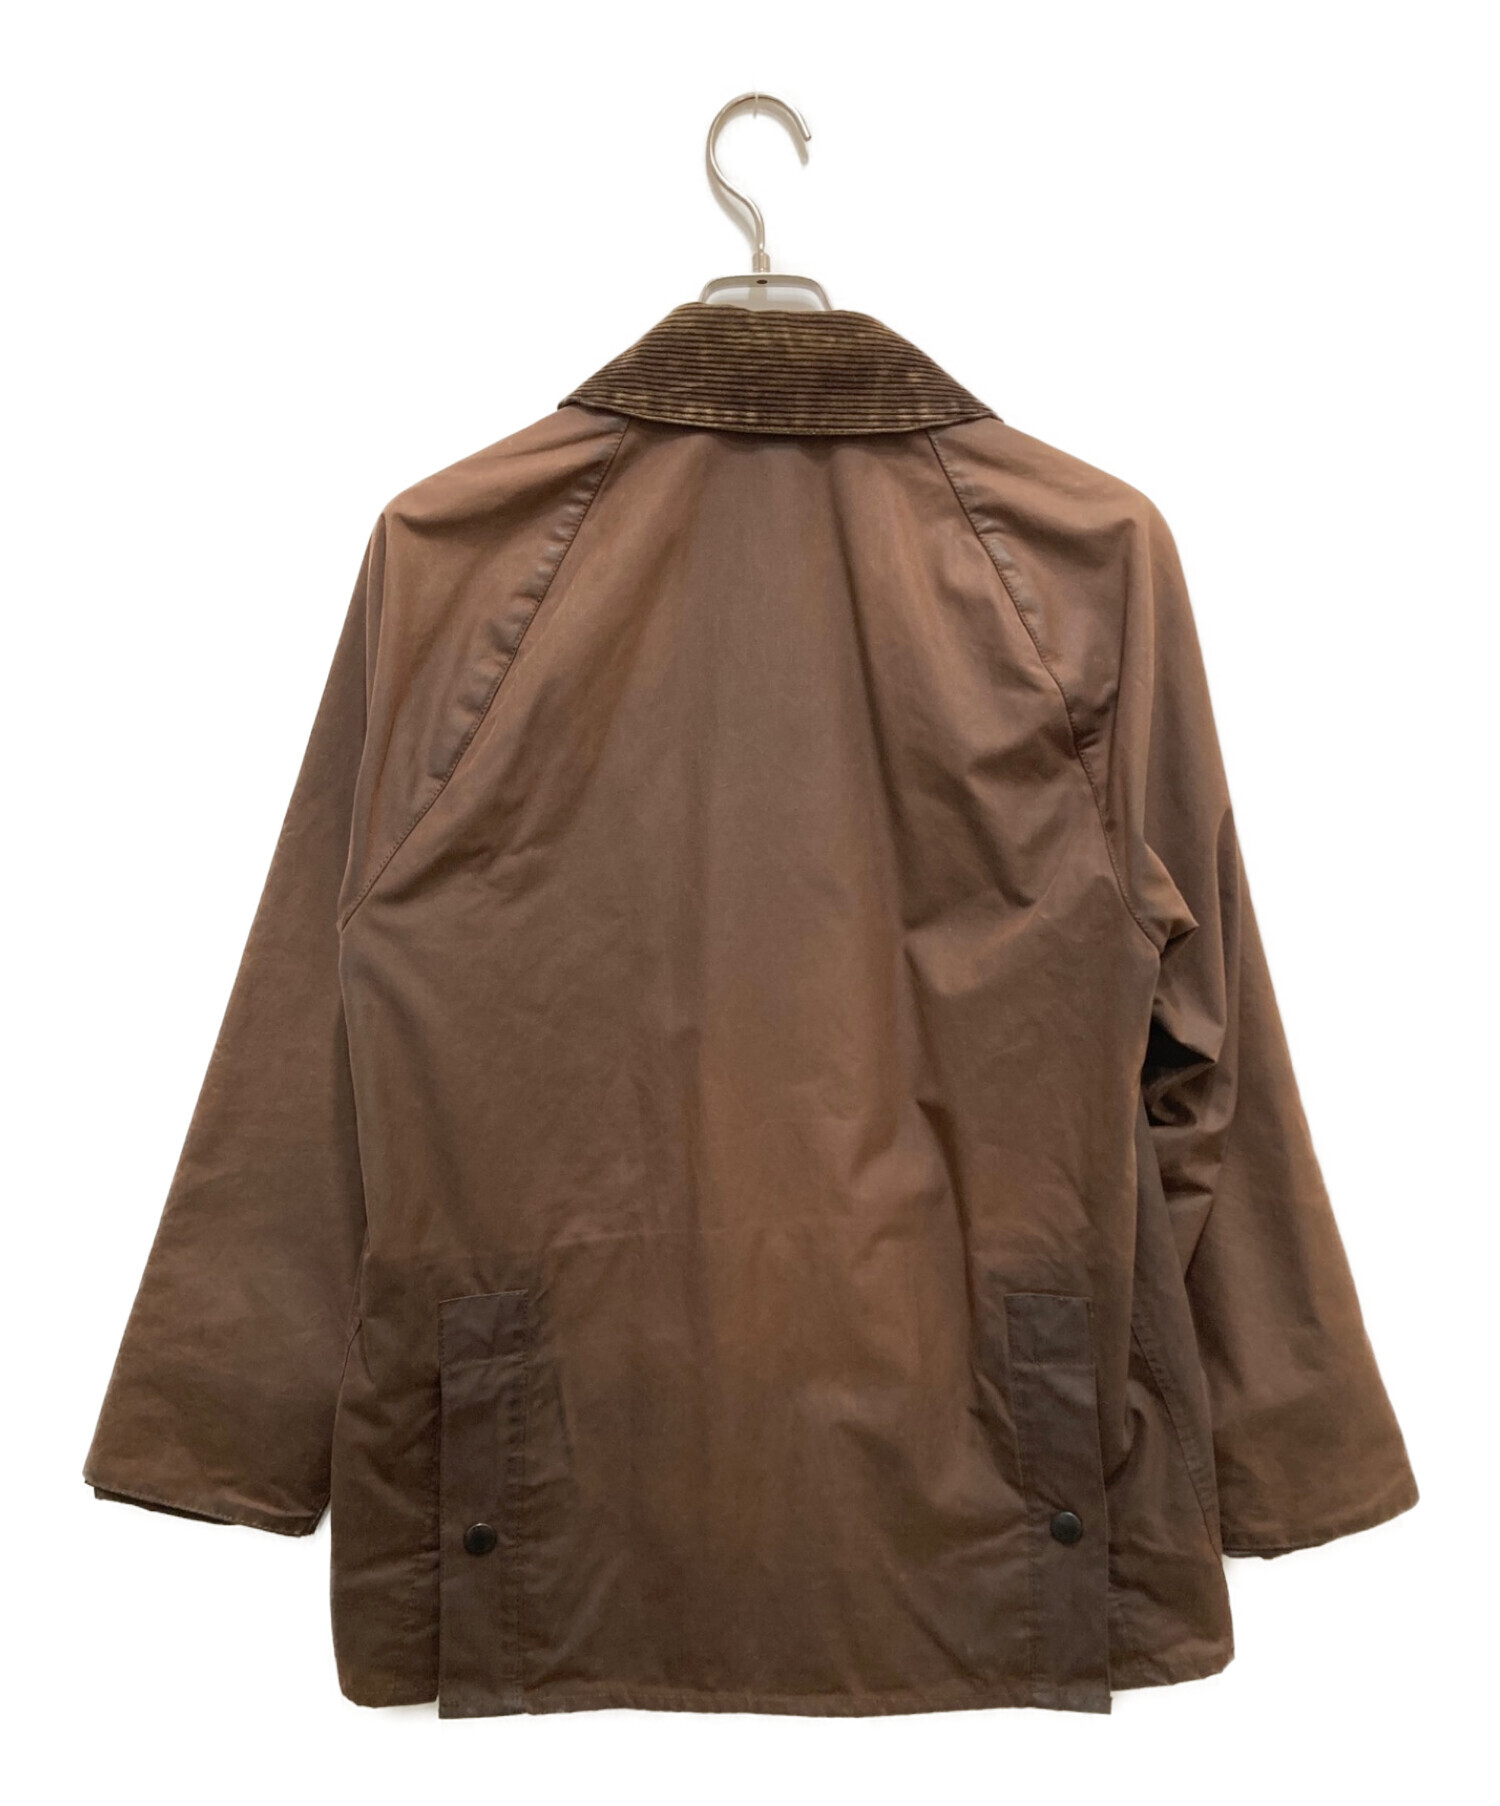 Barbour (バブアー) BEDALE OILED JACKET ブラウン サイズ:34